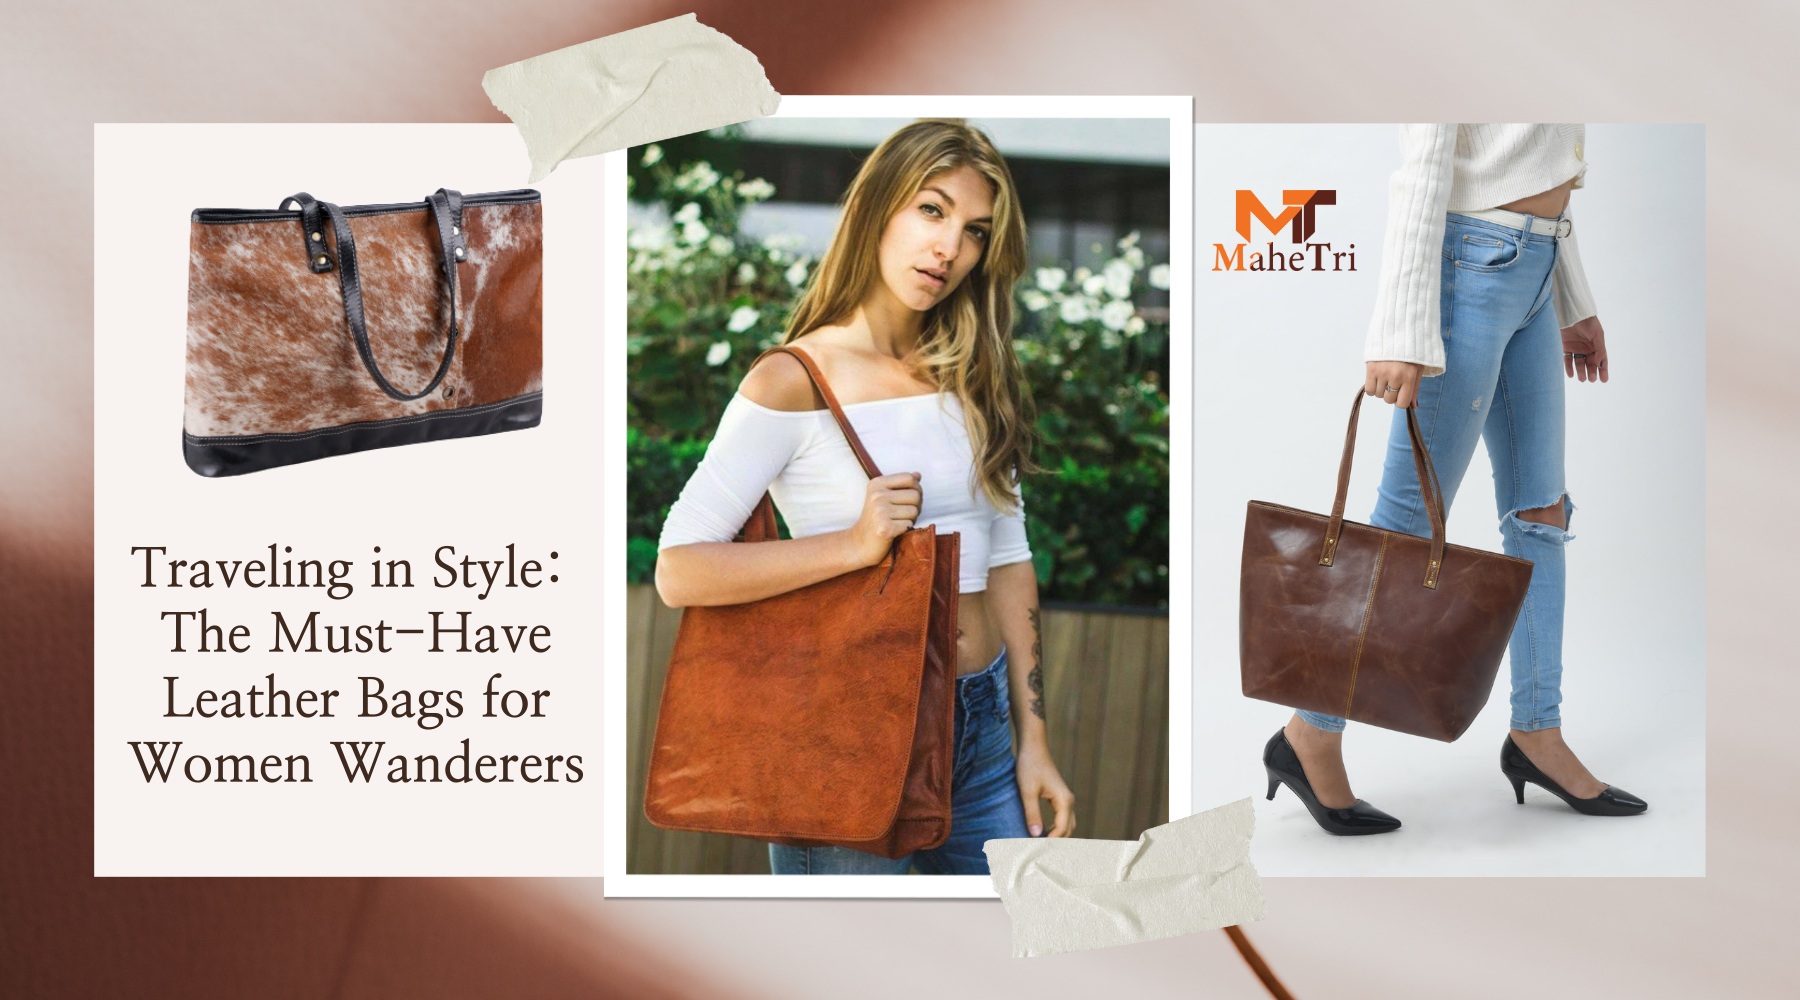 Traveling in Style: The Must-Have Leather Bags for Women Wanderers